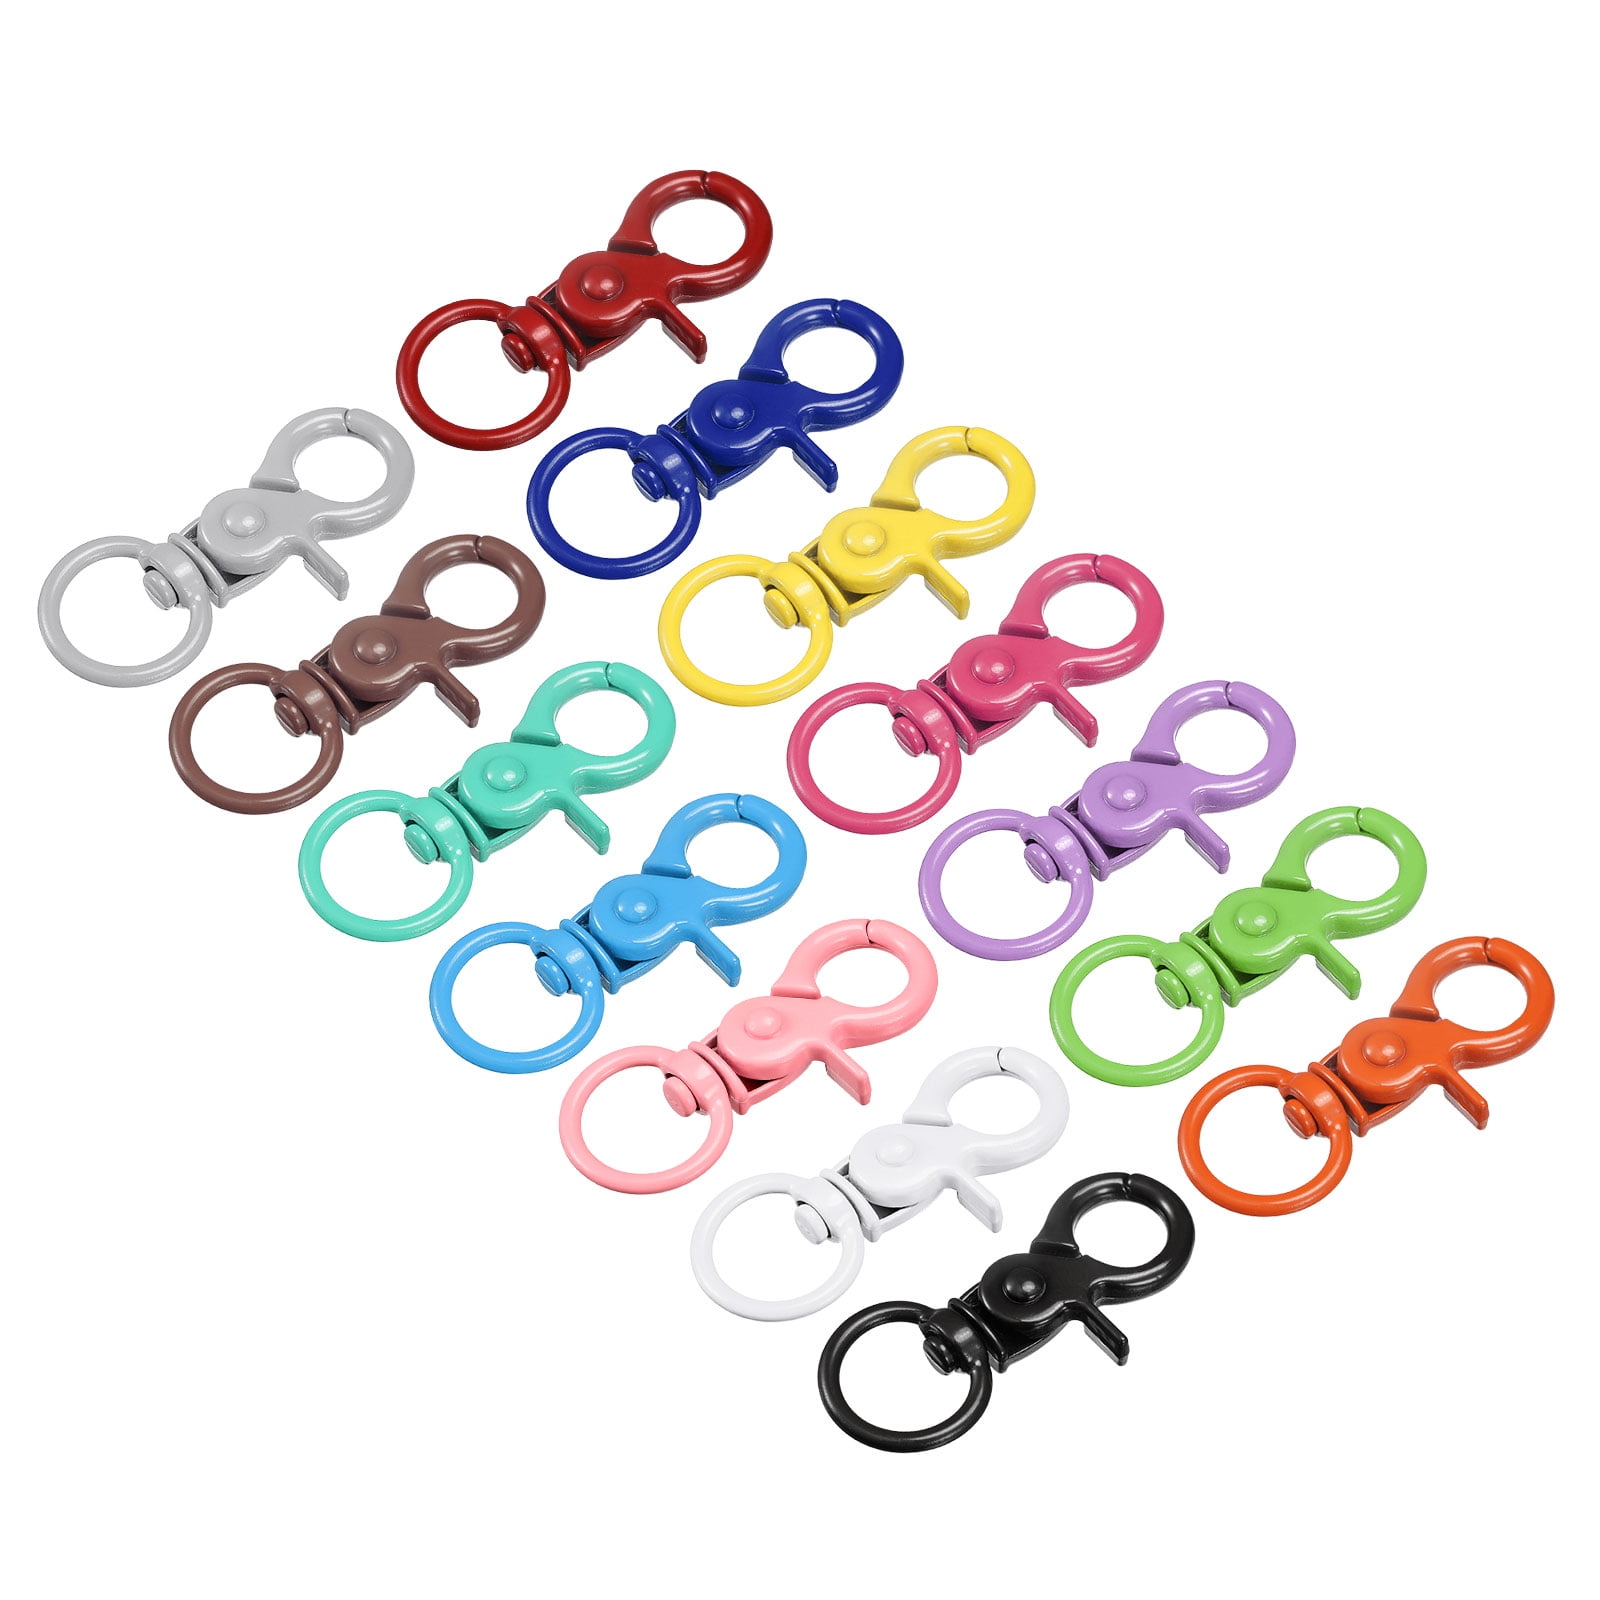 30Pcs Lobster Claw Clasps Keychain for Jewelry Making,Metal Lobster Clasp  Swivel Trigger Clips with Swivel Clasps Hook Clips Flat Split Keychain Ring